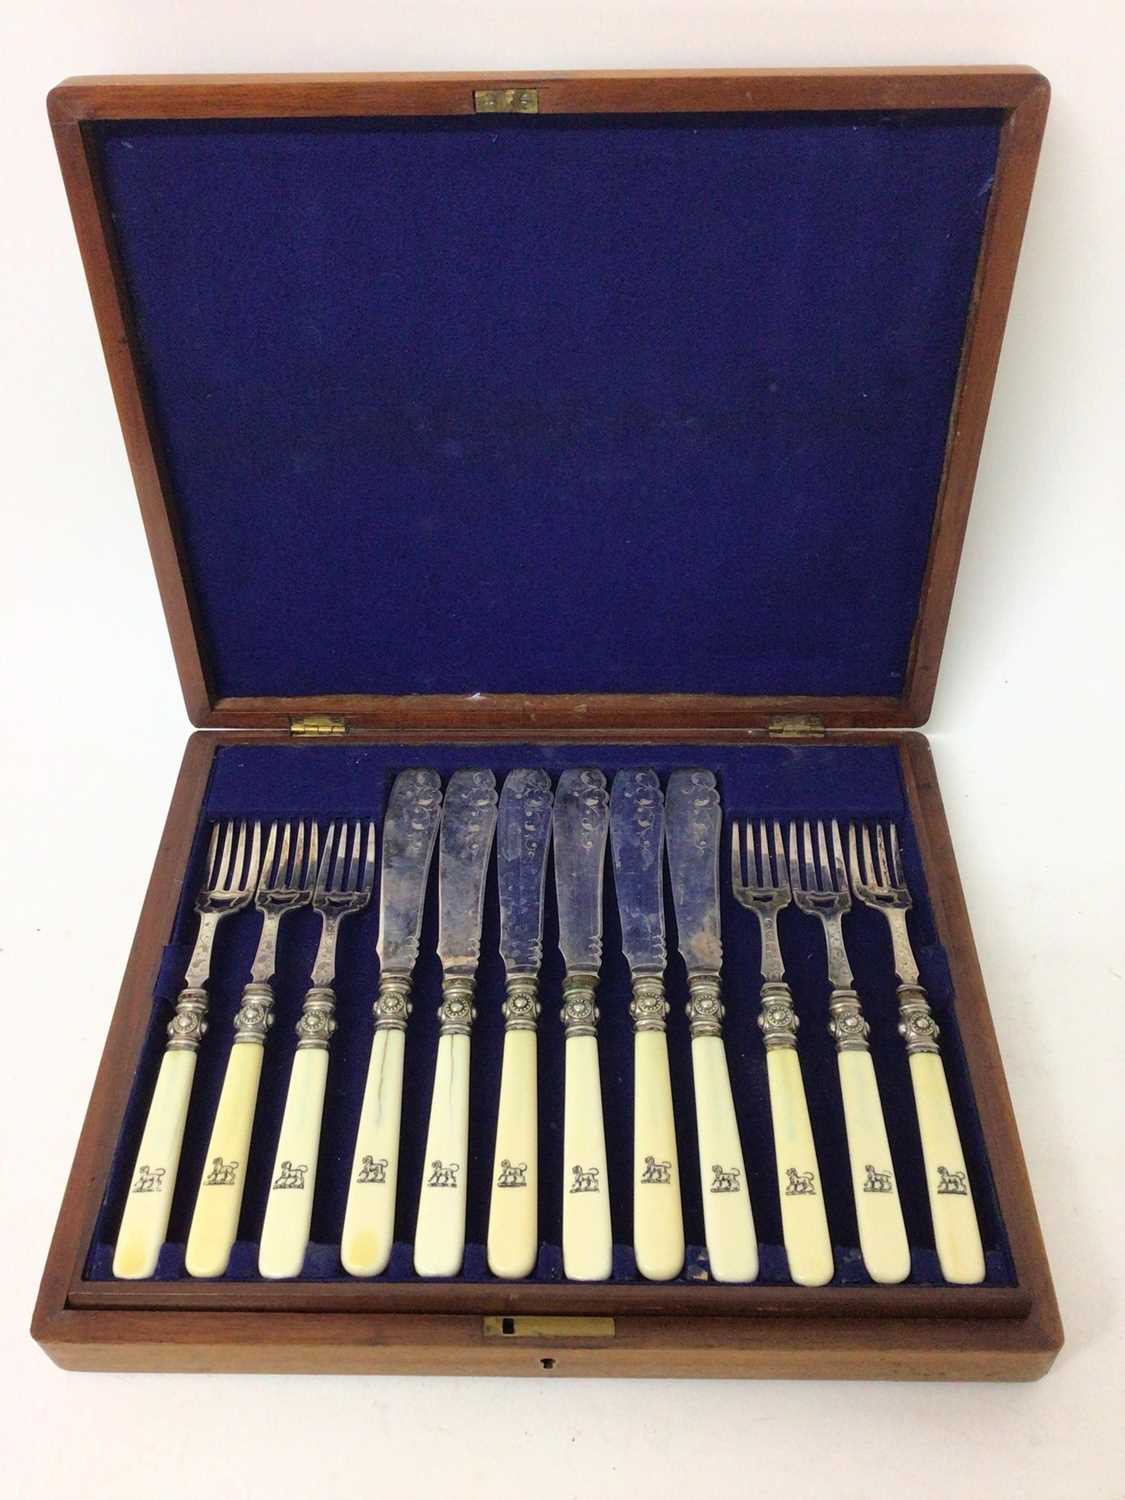 Lot 231 - Victorian canteen of twelve pairs of silver plated fish eaters with engraved decoration and turned ivory handles with engraved armorials in blue baize lined mahogany canteen